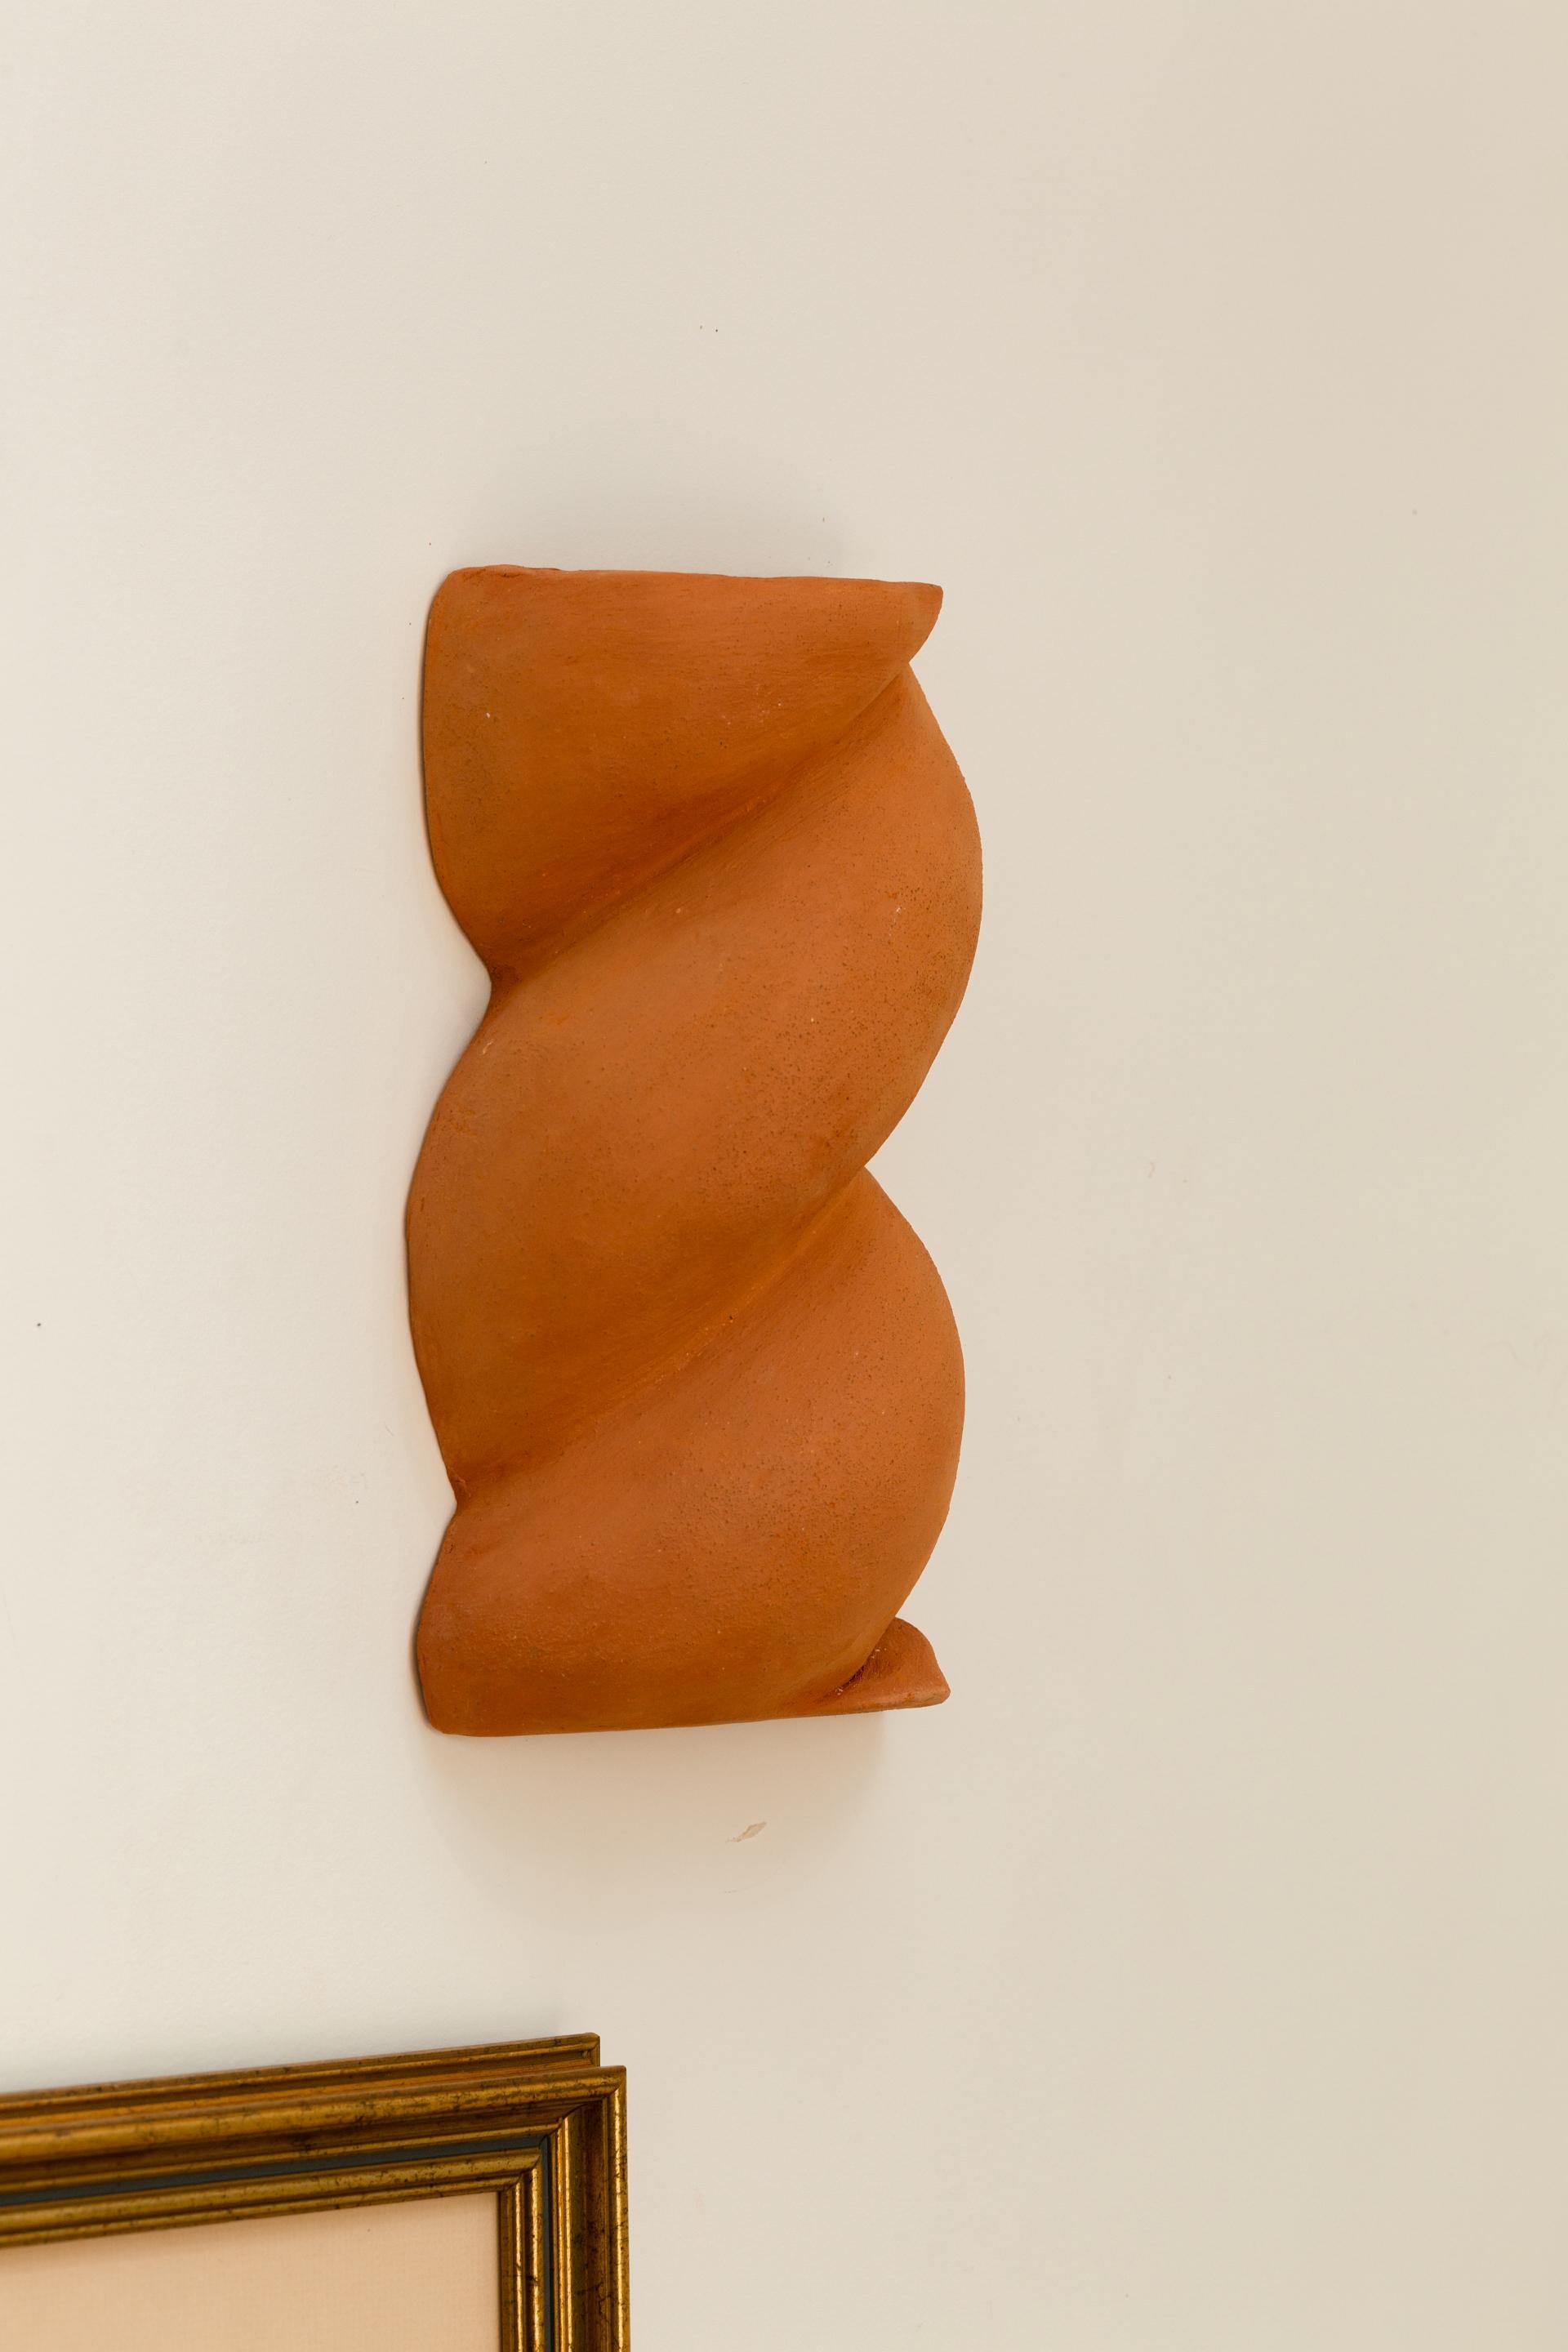 Small Terracotta Babka Sconce by Di Fretto
Dimensions: W 15 x D 10 x H 28 cm
Materials: Terracotta Faience (not glazed)
Also Available: White (not glazed)


The Babka wall light is a twist of chamotte terracotta earthenware. It is a symbol of